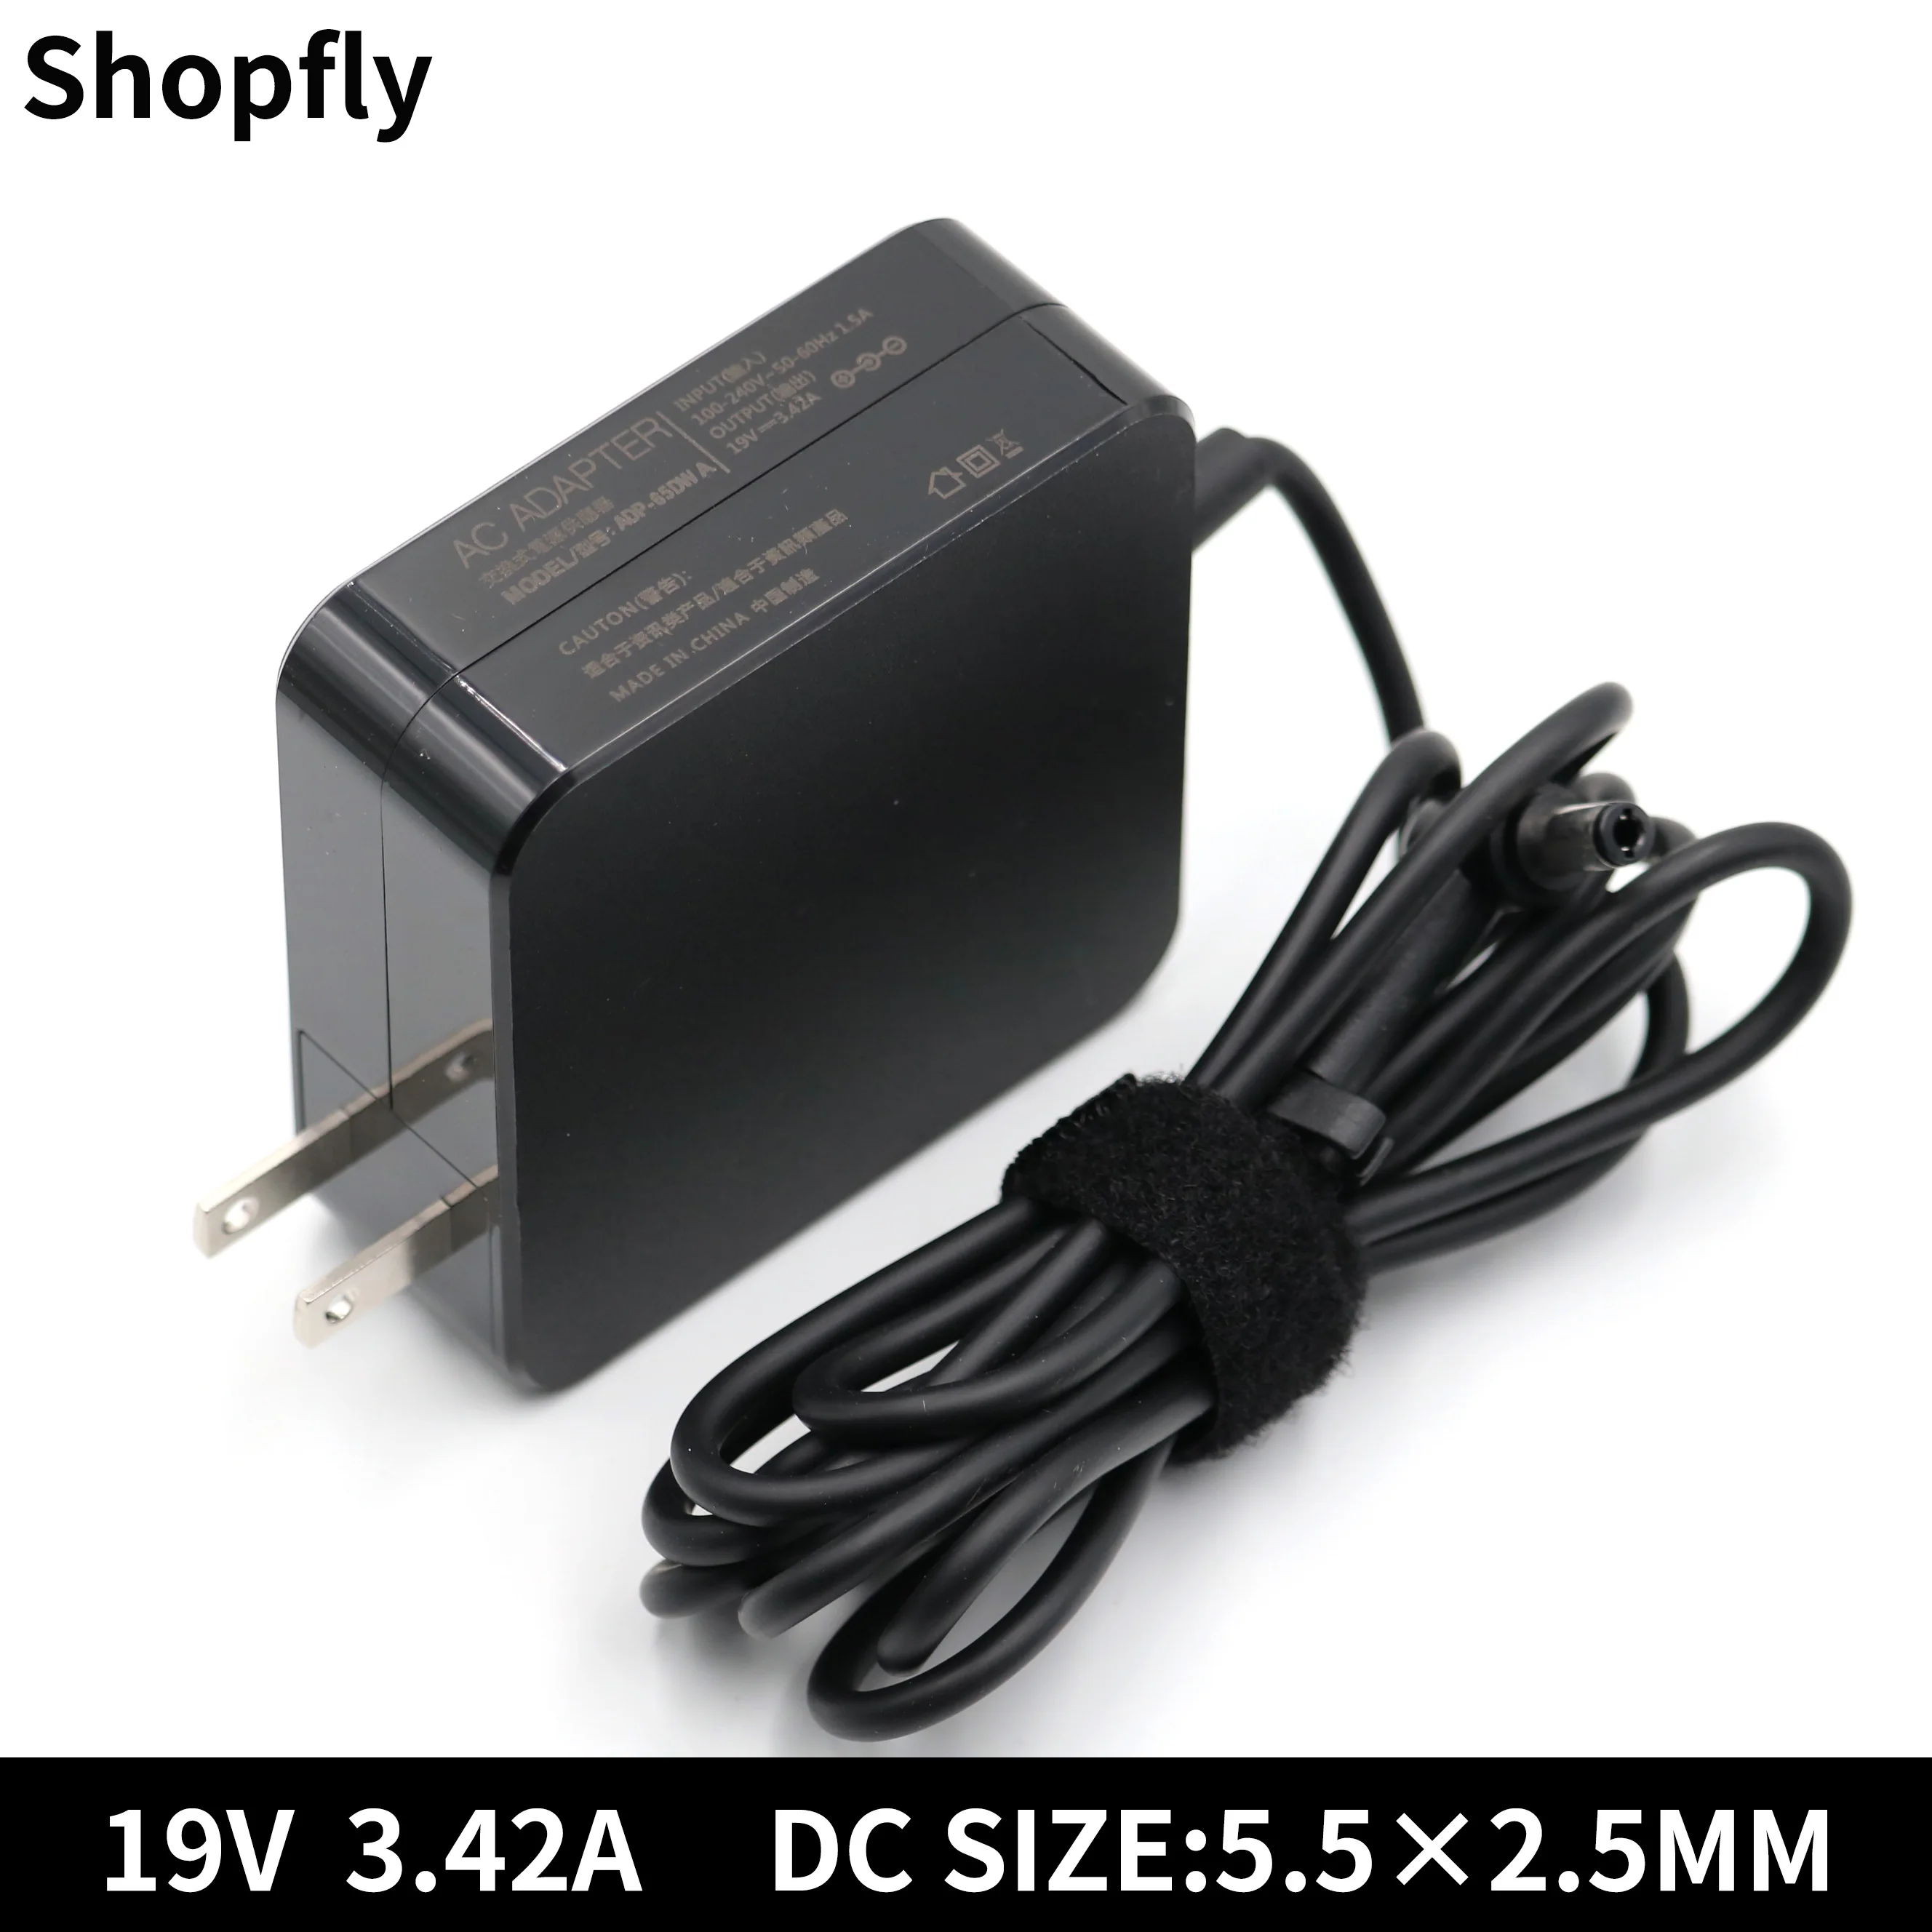 

19V 3.42A 65W 5.5x2.5mm AC Adapter Laptop Charger For Asus A450 K401 K501 F554 F555LA X502 X550 X551 X551MA X552 X552L X554 X555